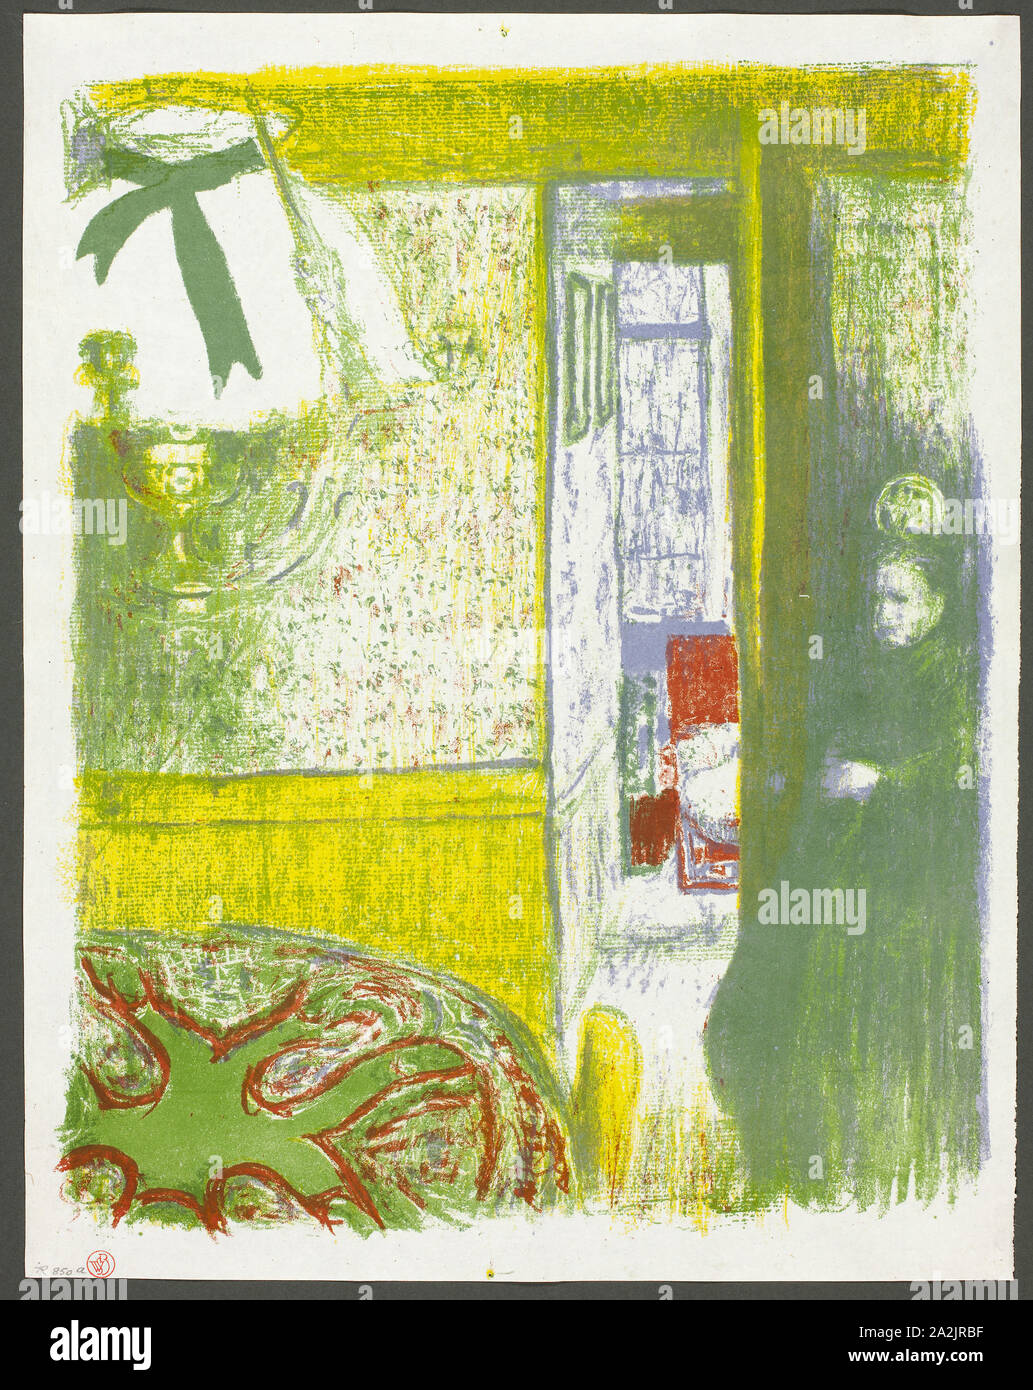 Interior with Hanging Lamp, 1899, Edouard Vuillard (French, 1868-1940), printed by Auguste Clot (French, 1858-1936), published by Ambroise Vollard (French, 1867-1939), France, Color lithograph on grayish-ivory China paper, 381 × 285 mm (image), 385 × 303 mm (sheet Stock Photo